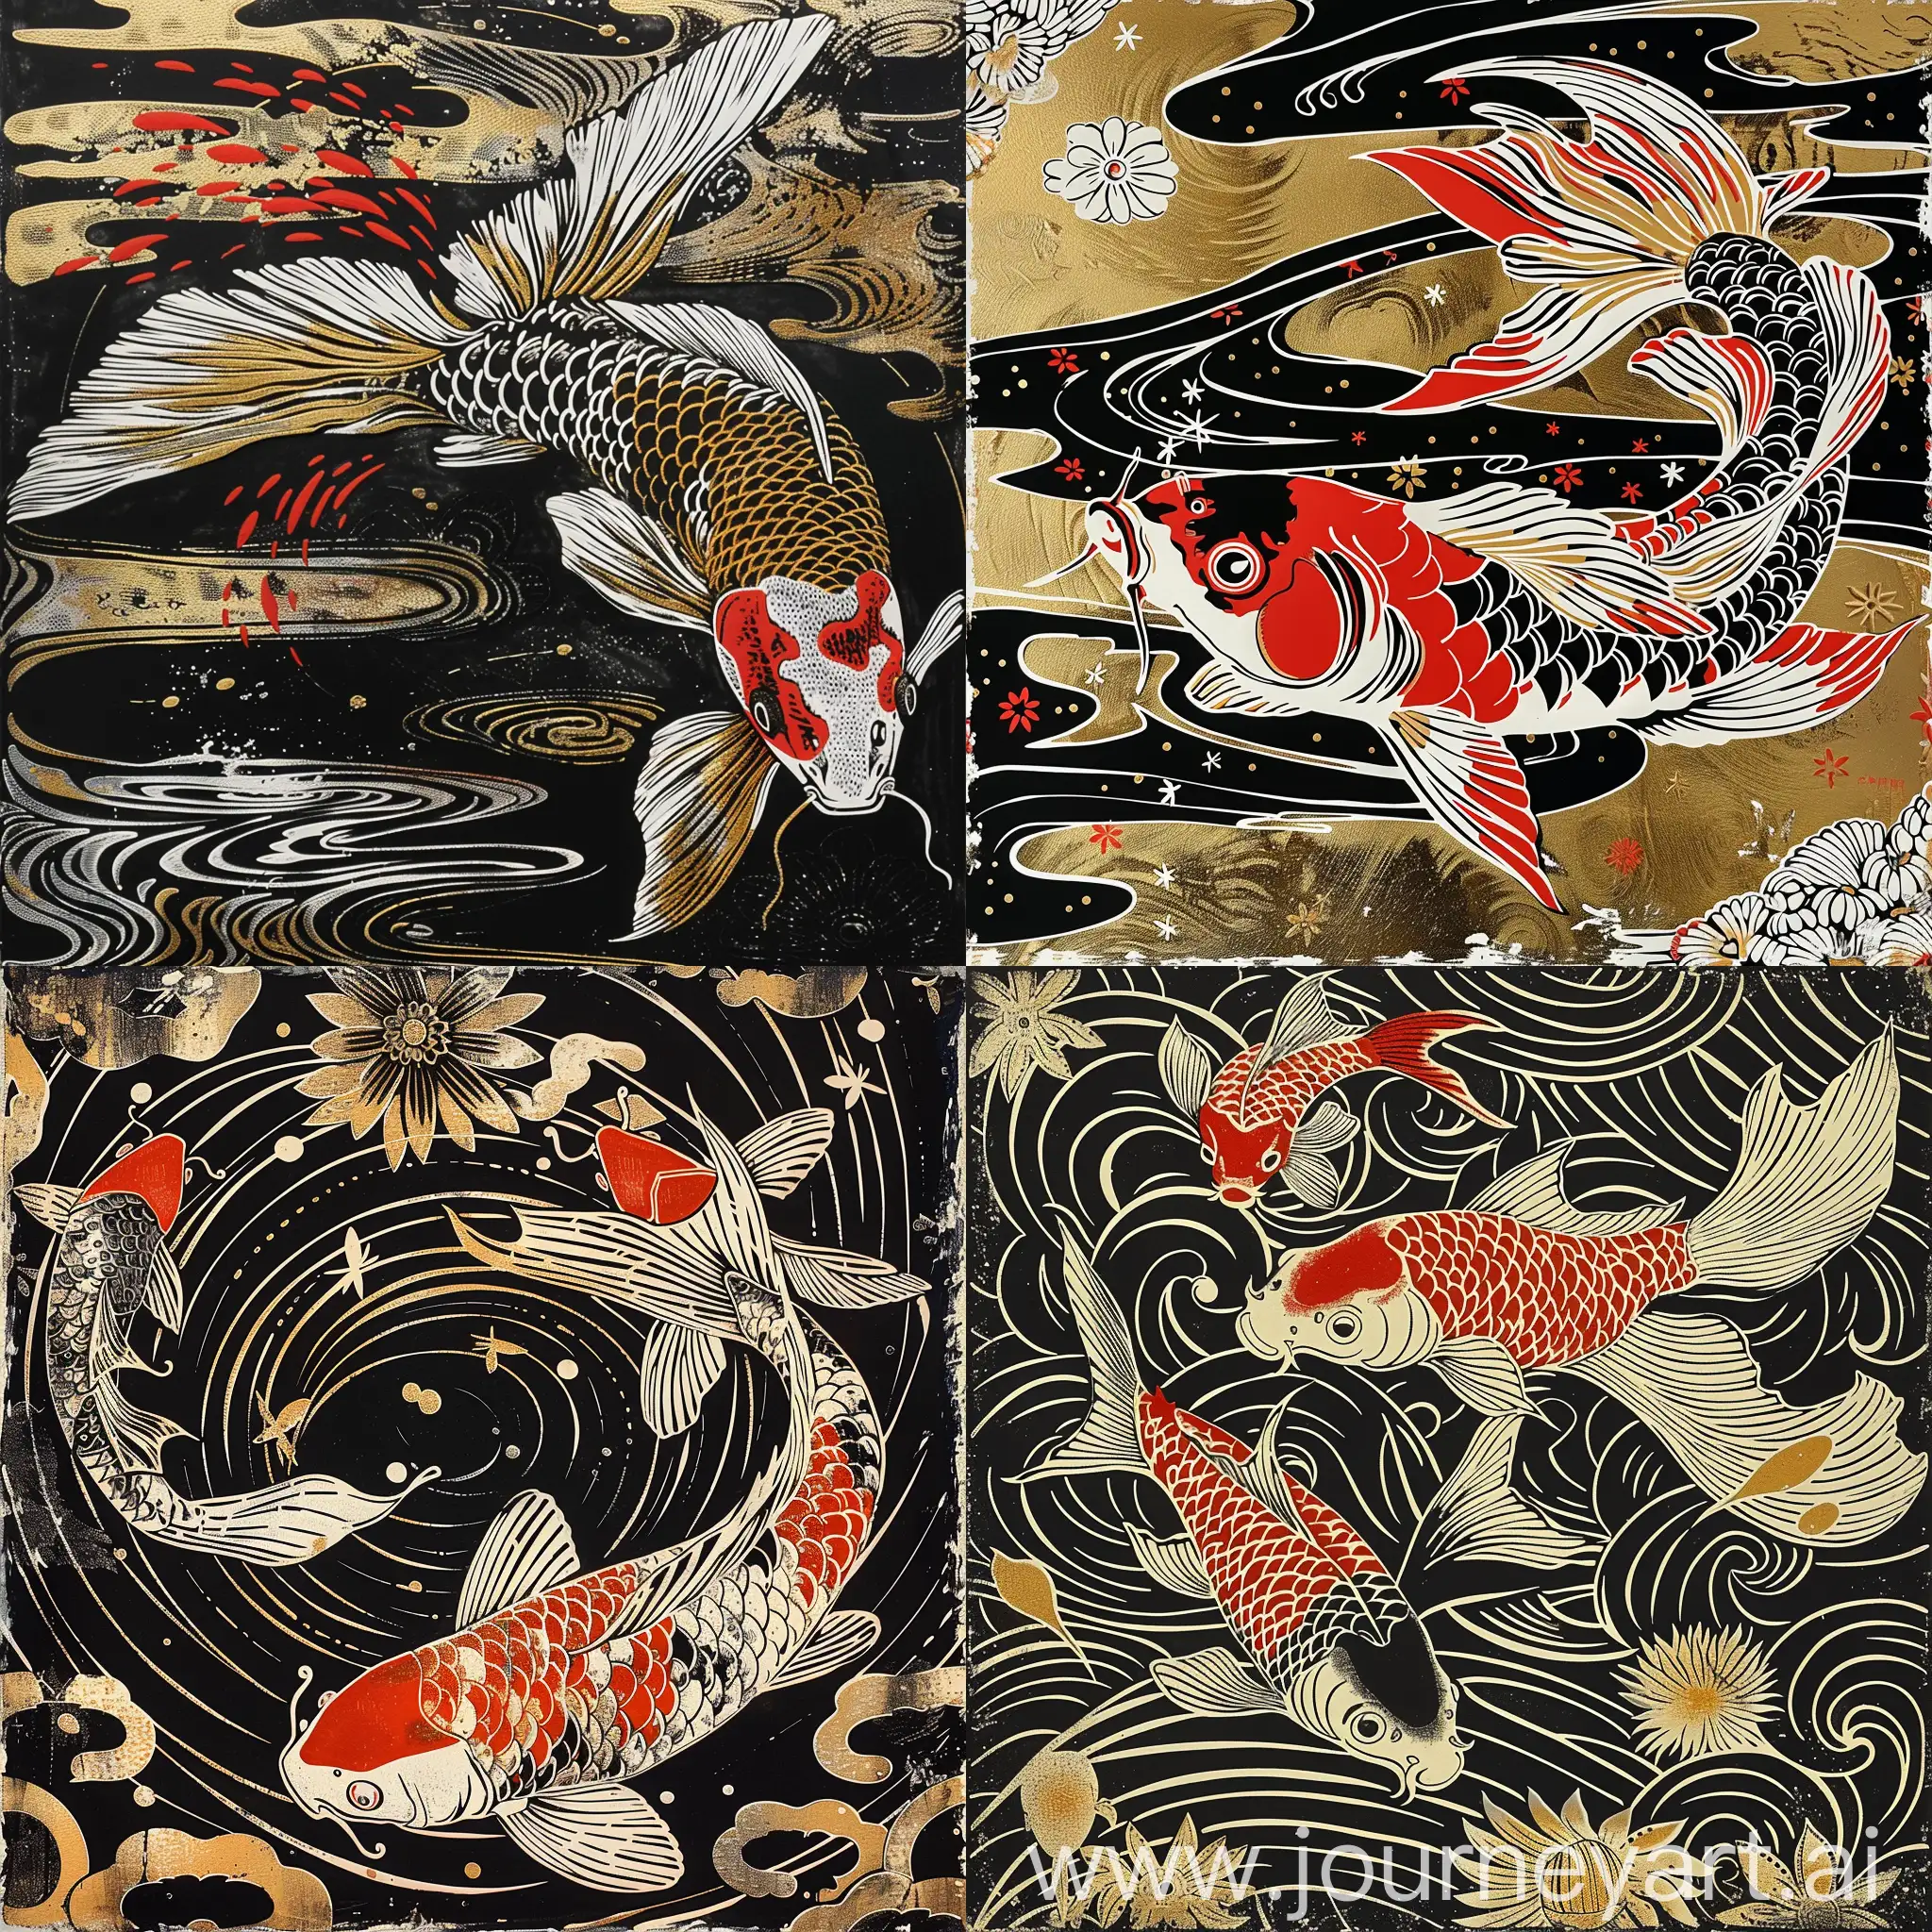 Japanese butterfly koi linocut print with ornate patterns and fine line textures, dynamic composition, black, gold, white, red